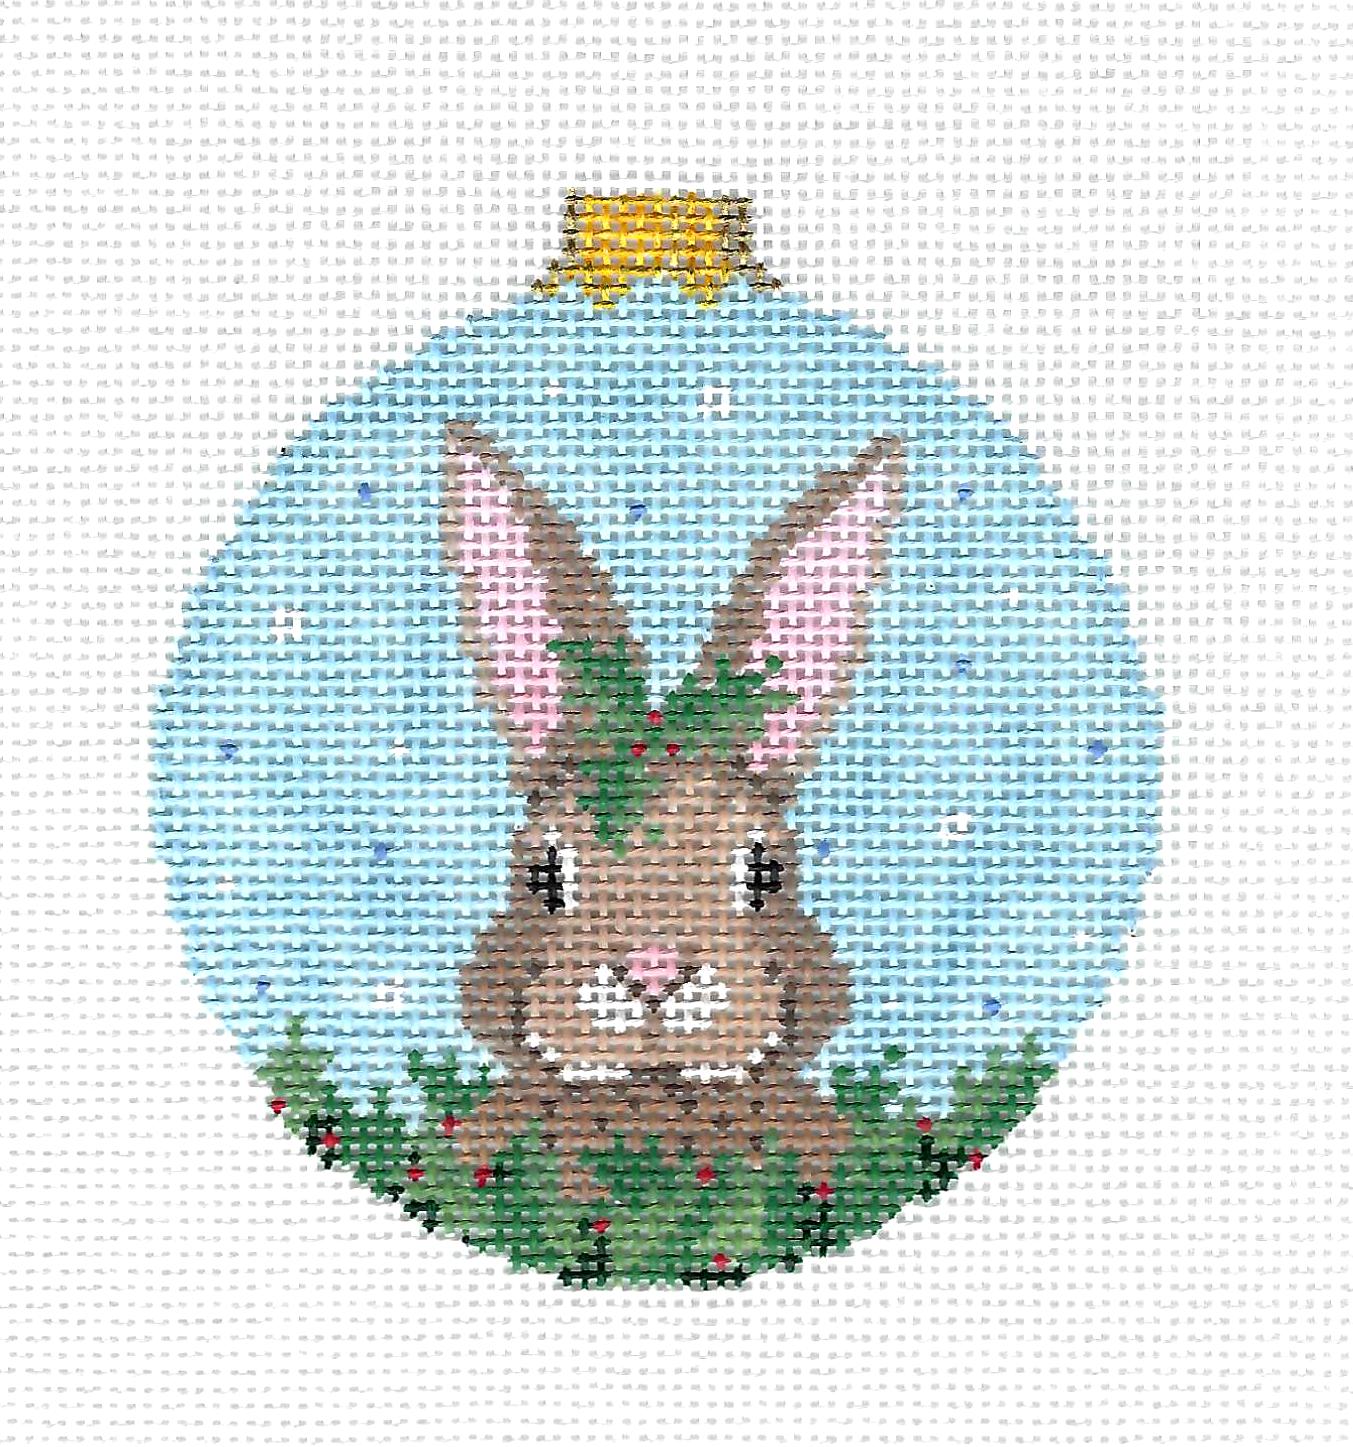 Rabbit ~ Brown Bunny in a Winter Holly Bush handpainted Needlepoint Ornament by Susan Roberts